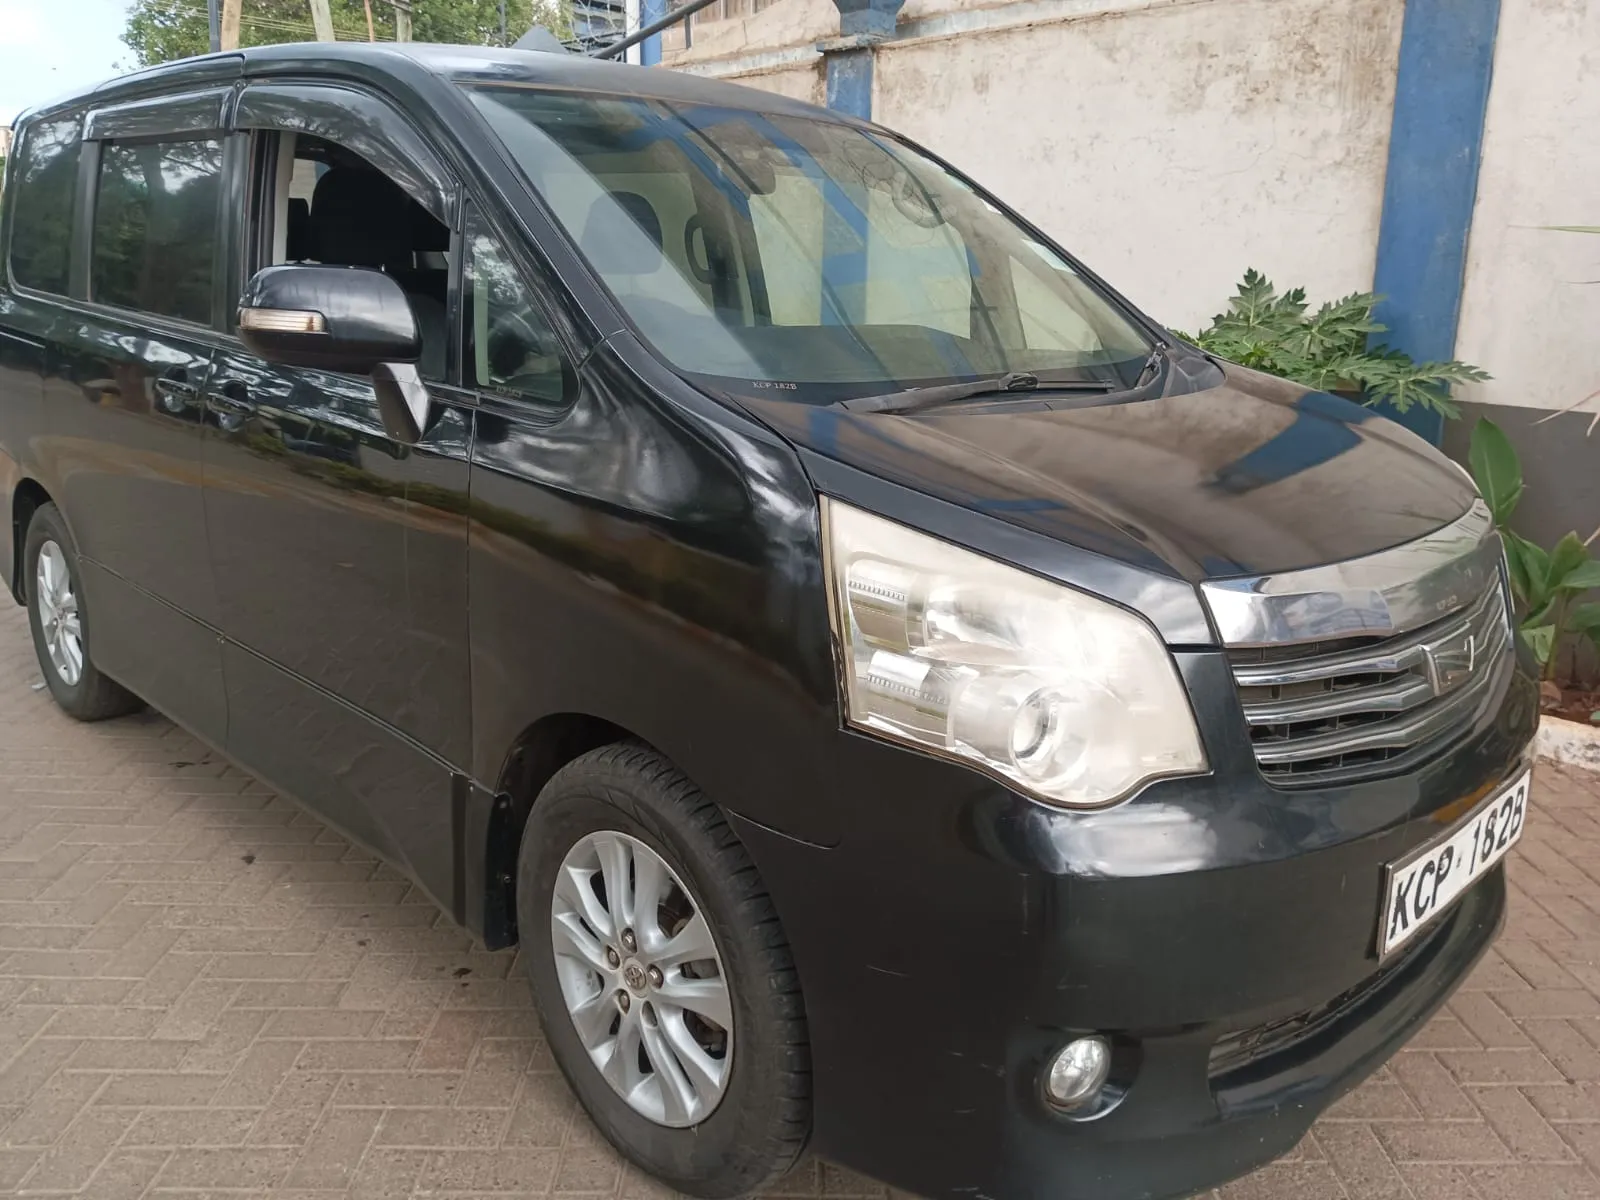 Cars Cars For Sale/Vehicles-Toyota NOAH New Shape QUICK SALE You Pay 30% Deposit Trade in OK EXCLUSIVE